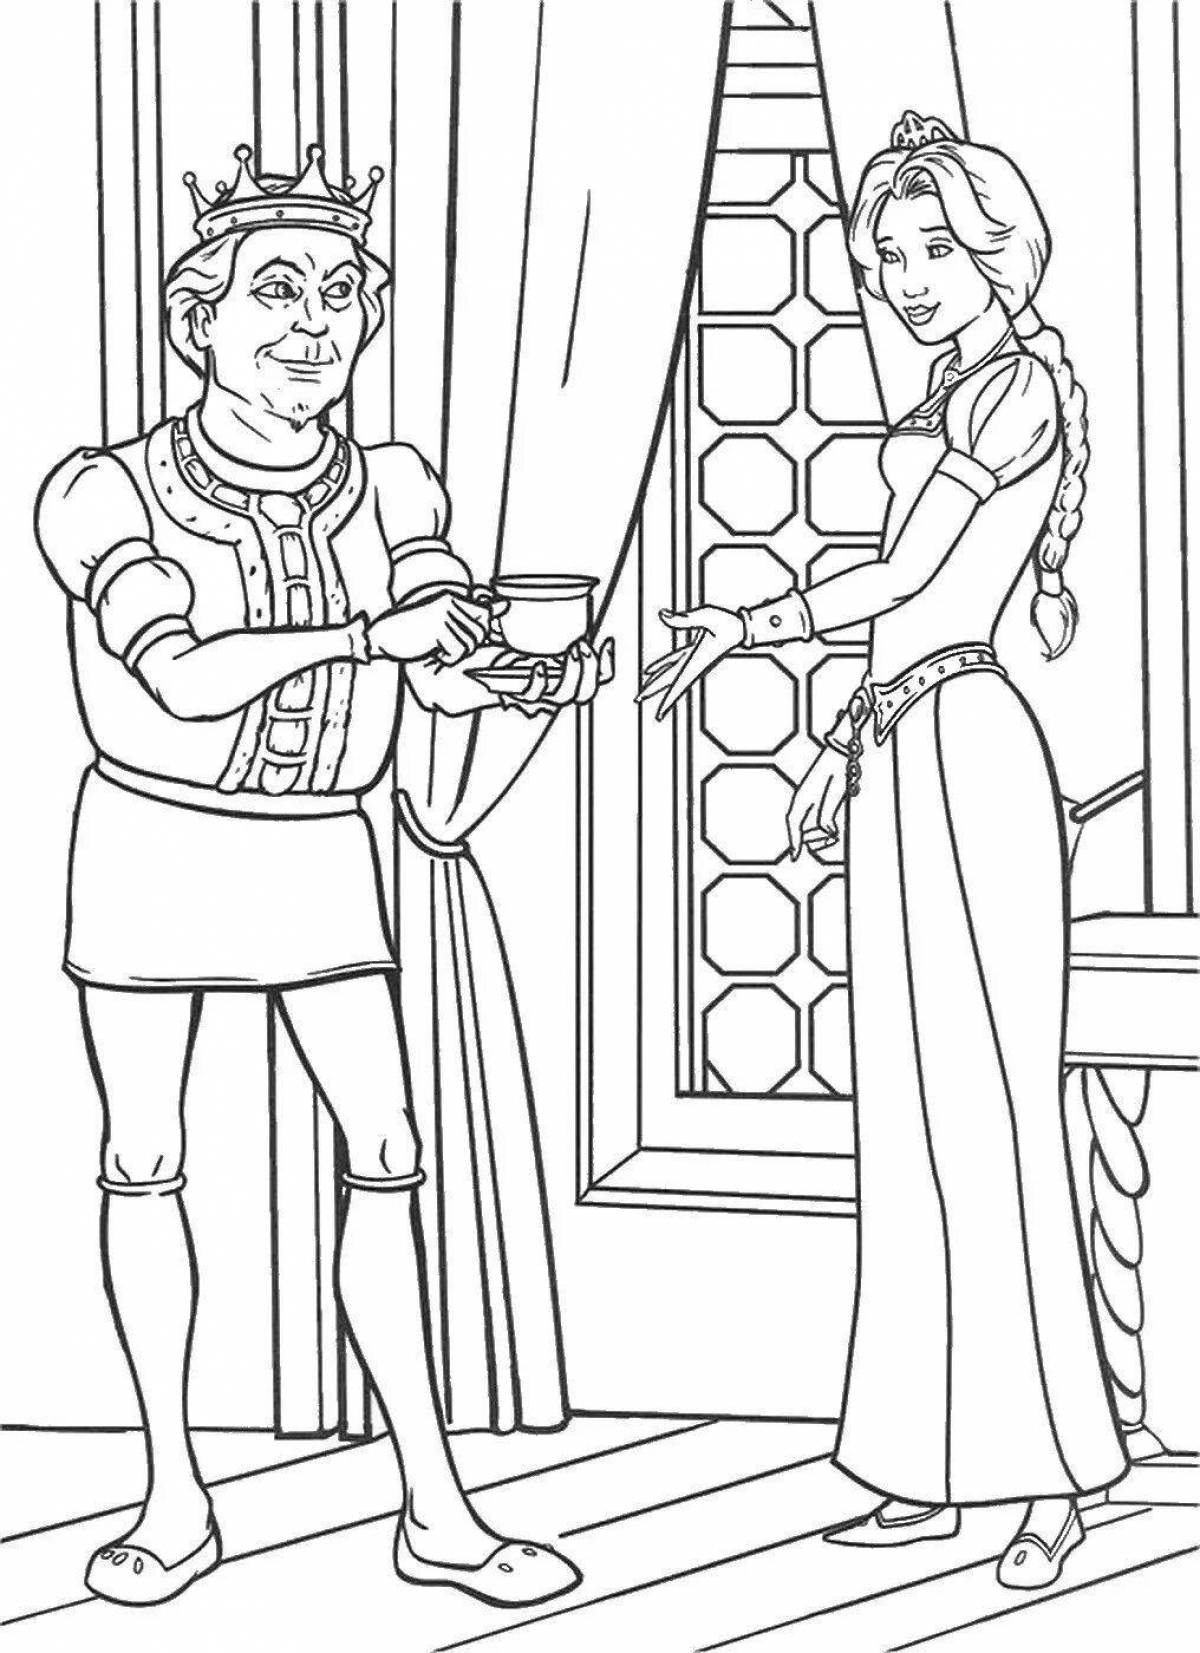 Elegant king and queen coloring book